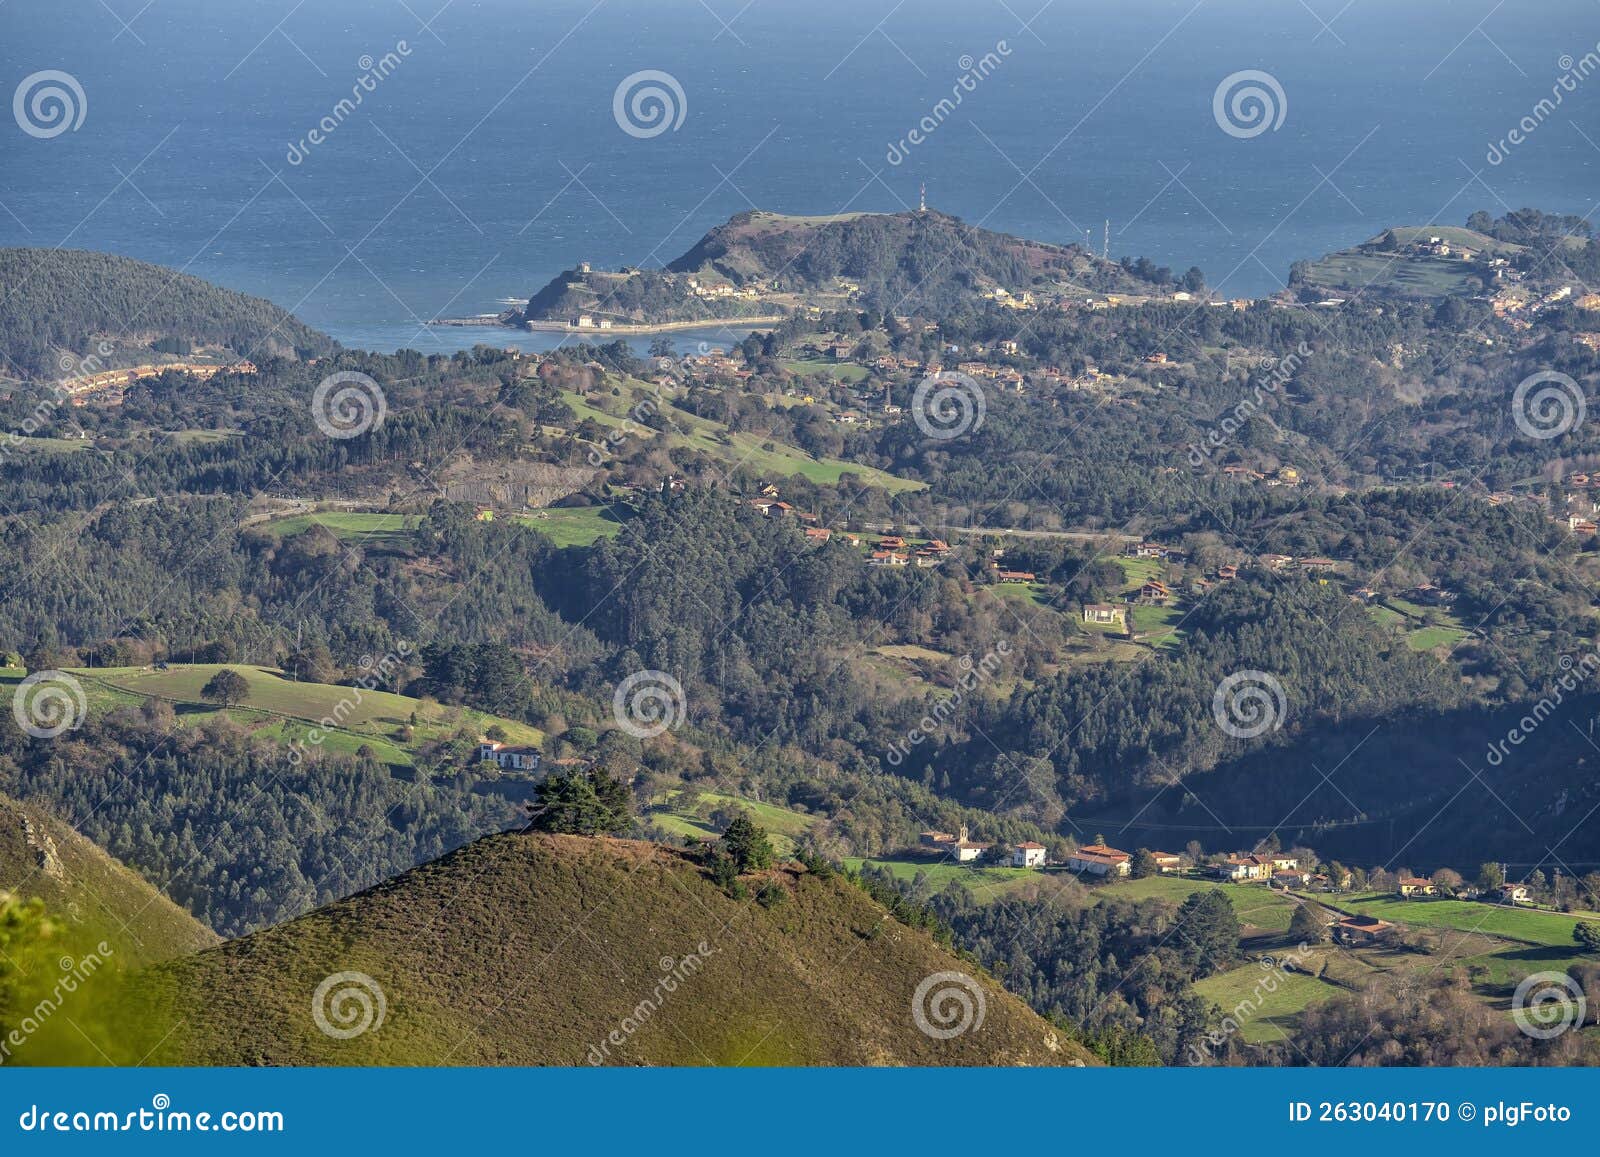 general view of the town ribadesella in spain